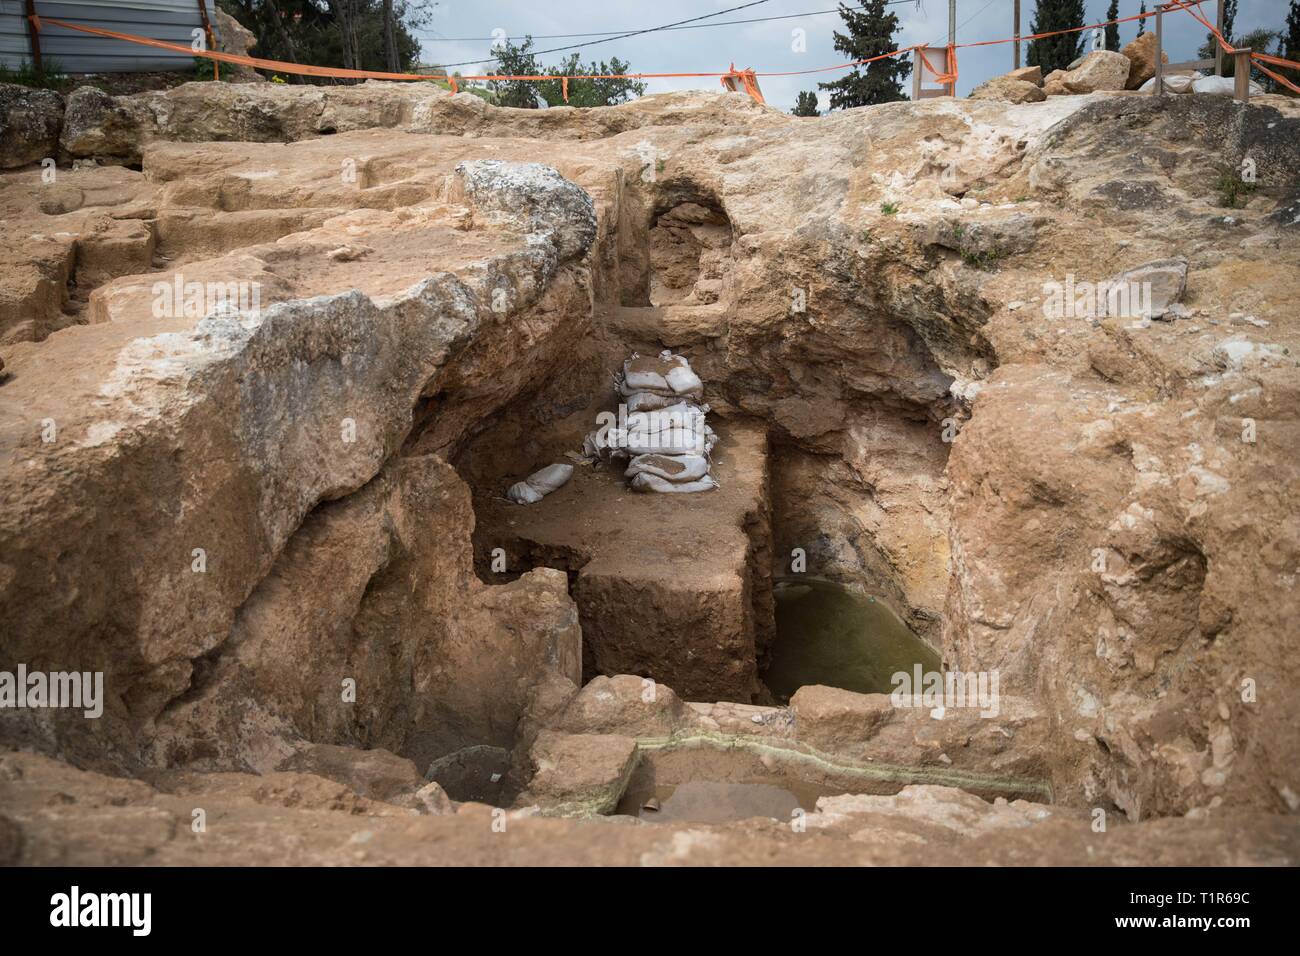 Jerusalem. 27th Mar, 2019. Photo taken on March 27, 2019 shows the view of the remains of a rural Jewish settlement at the Sharafat neighborhood of Jerusalem. Remains of a rural Jewish settlement from 2,000 years ago with luxurious burial ground were discovered in excavations in southern Jerusalem, the Israel Antiquities Authority (IAA) reported on Wednesday. Credit: JINI/Xinhua/Alamy Live News Stock Photo